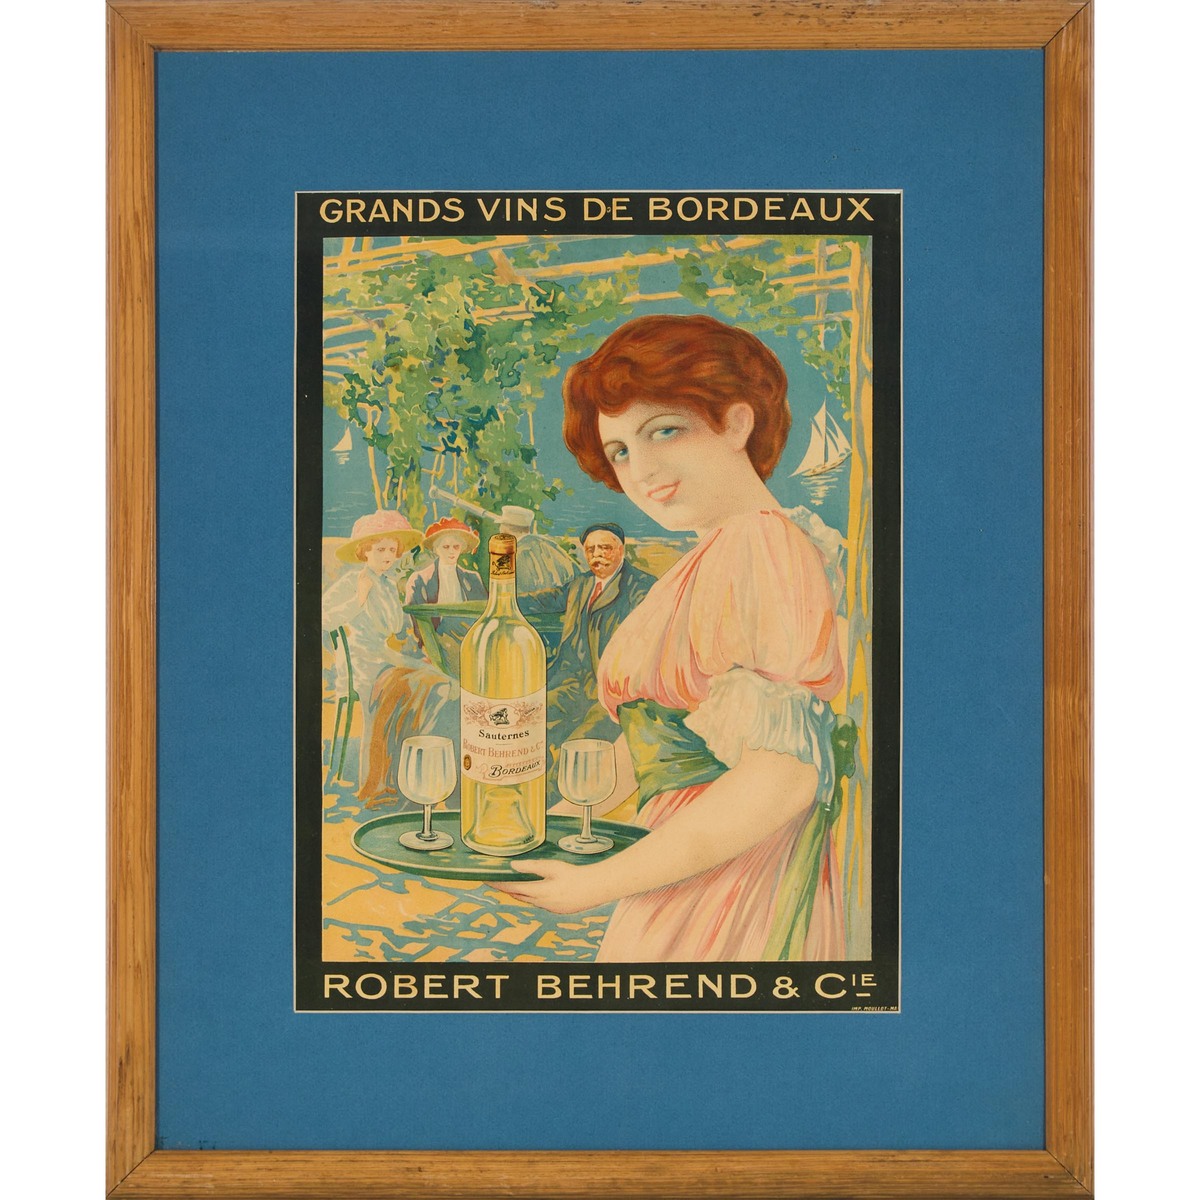 French White Bordeaux Advertising Poster for Robert Behrend & Cie., early 20th century, sight 17.5 x